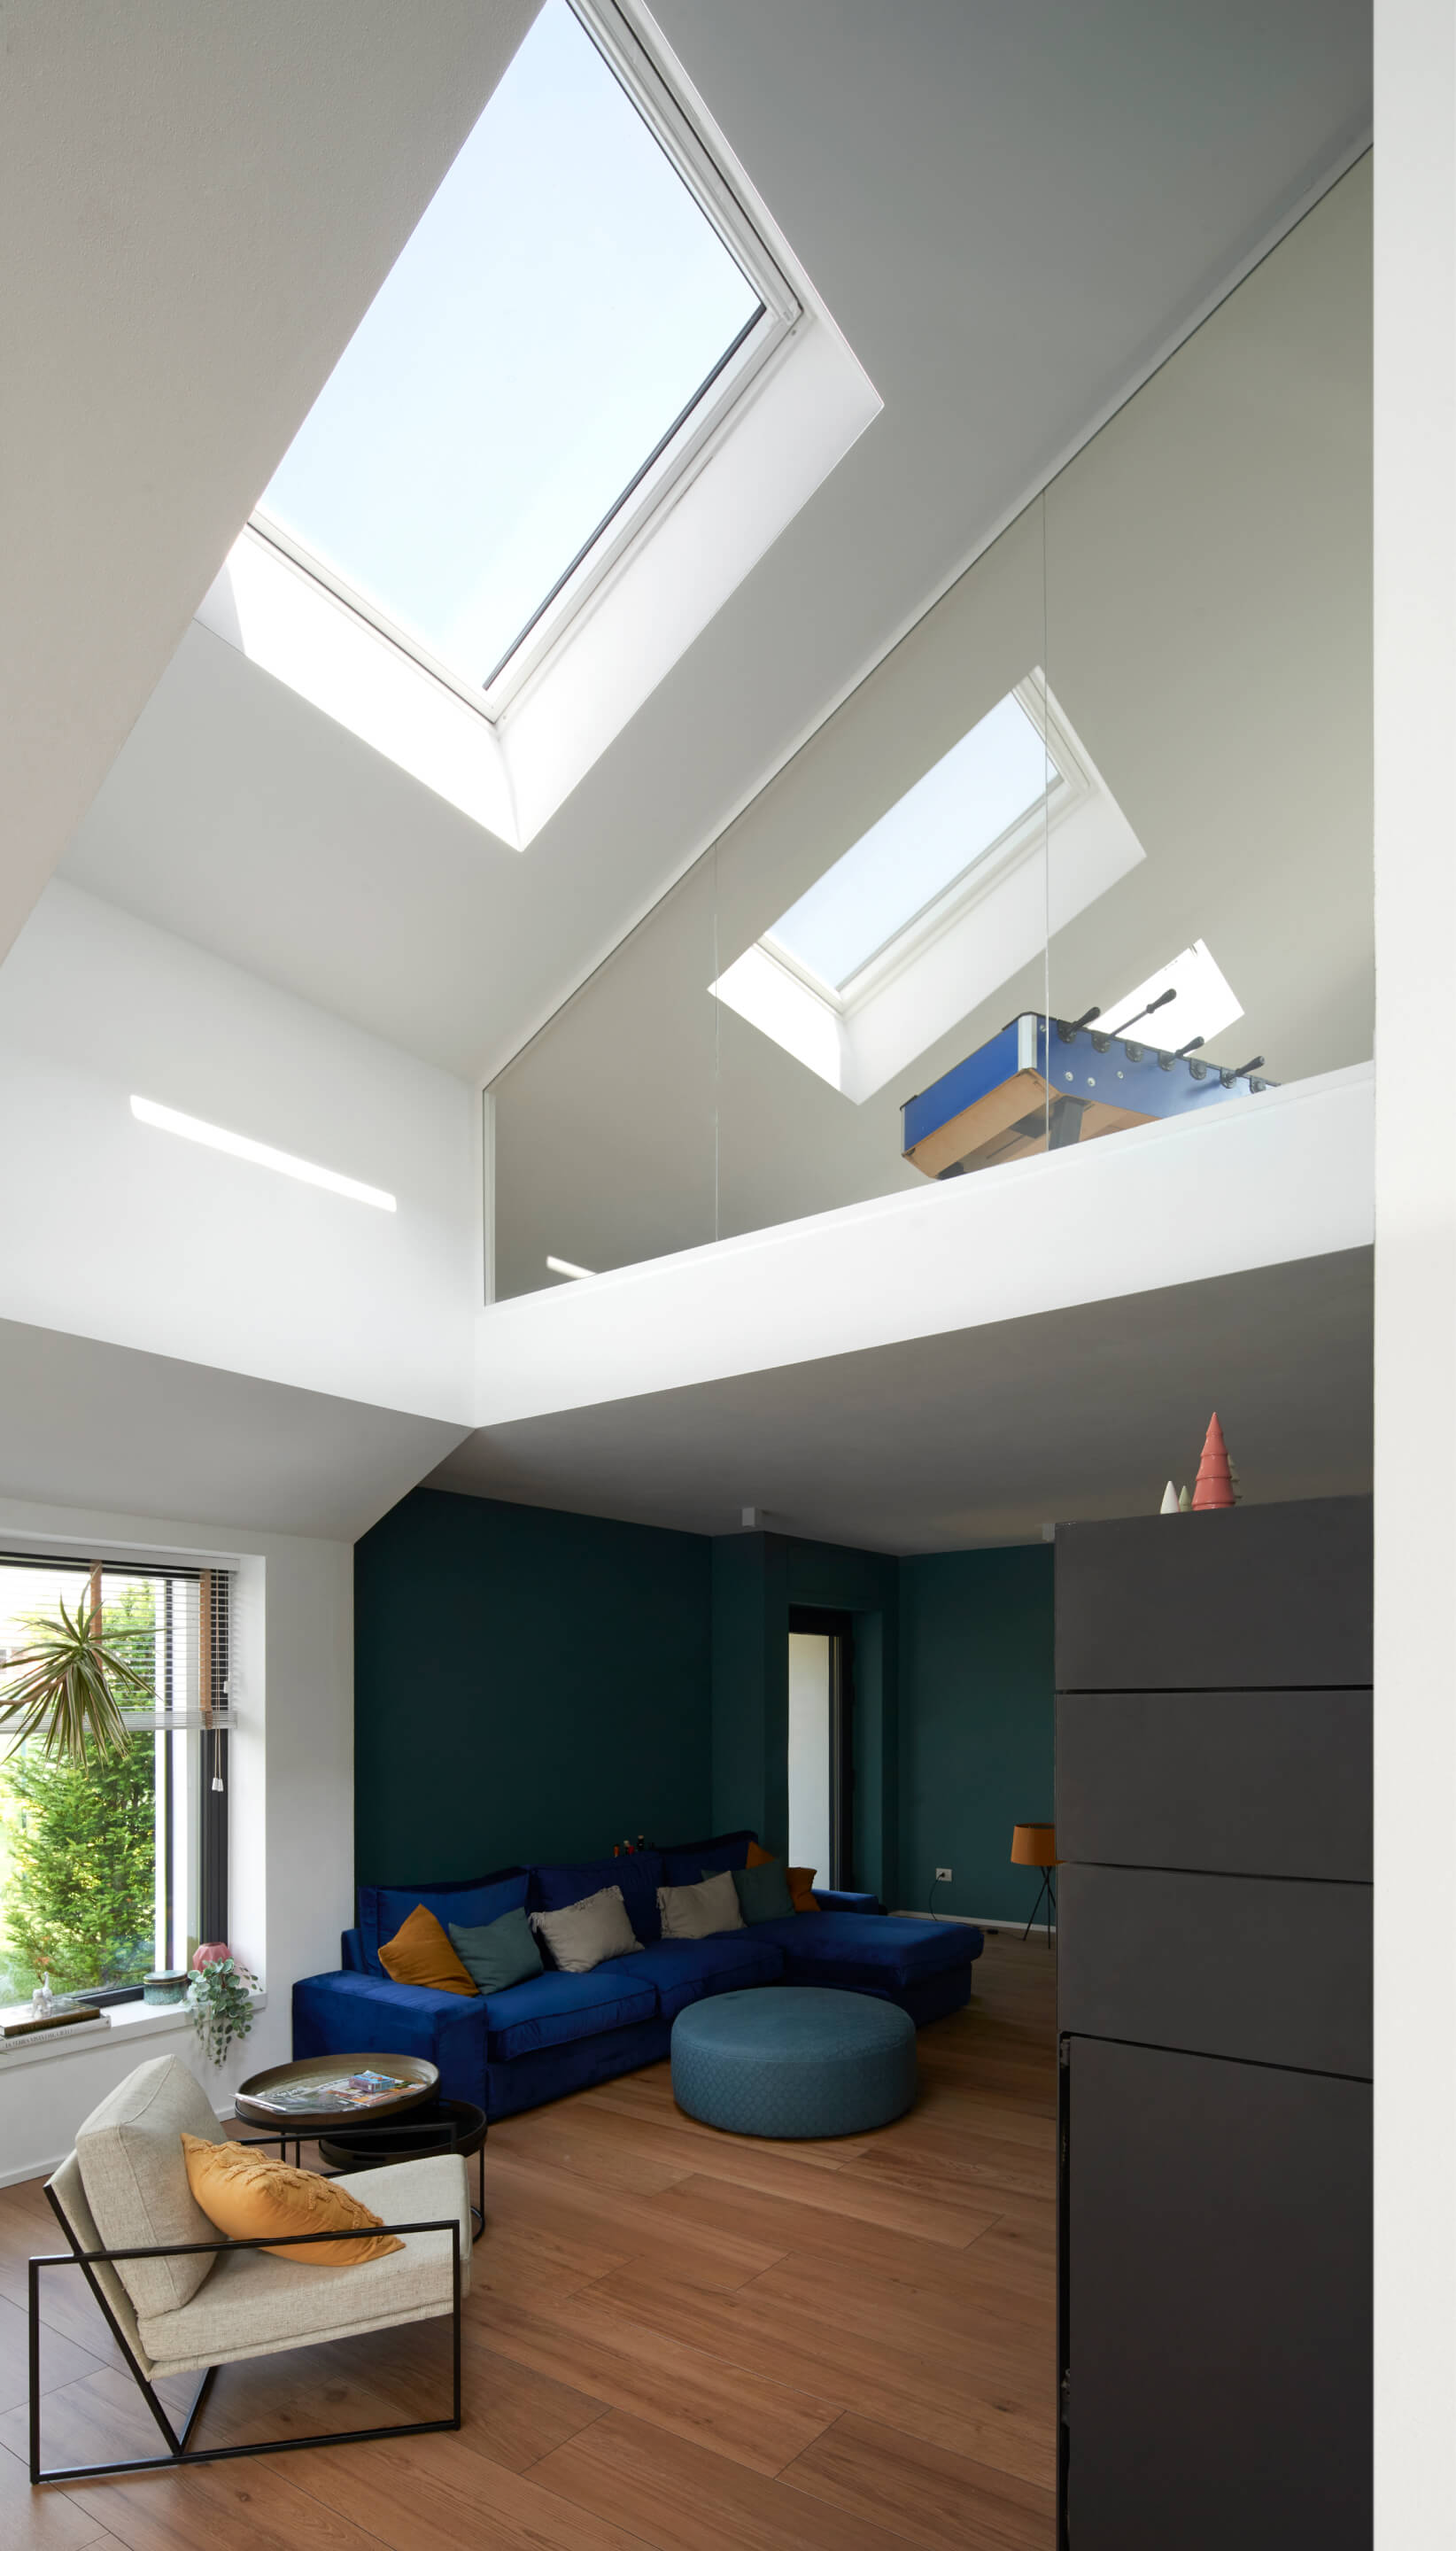 Attic and living room with roof windows